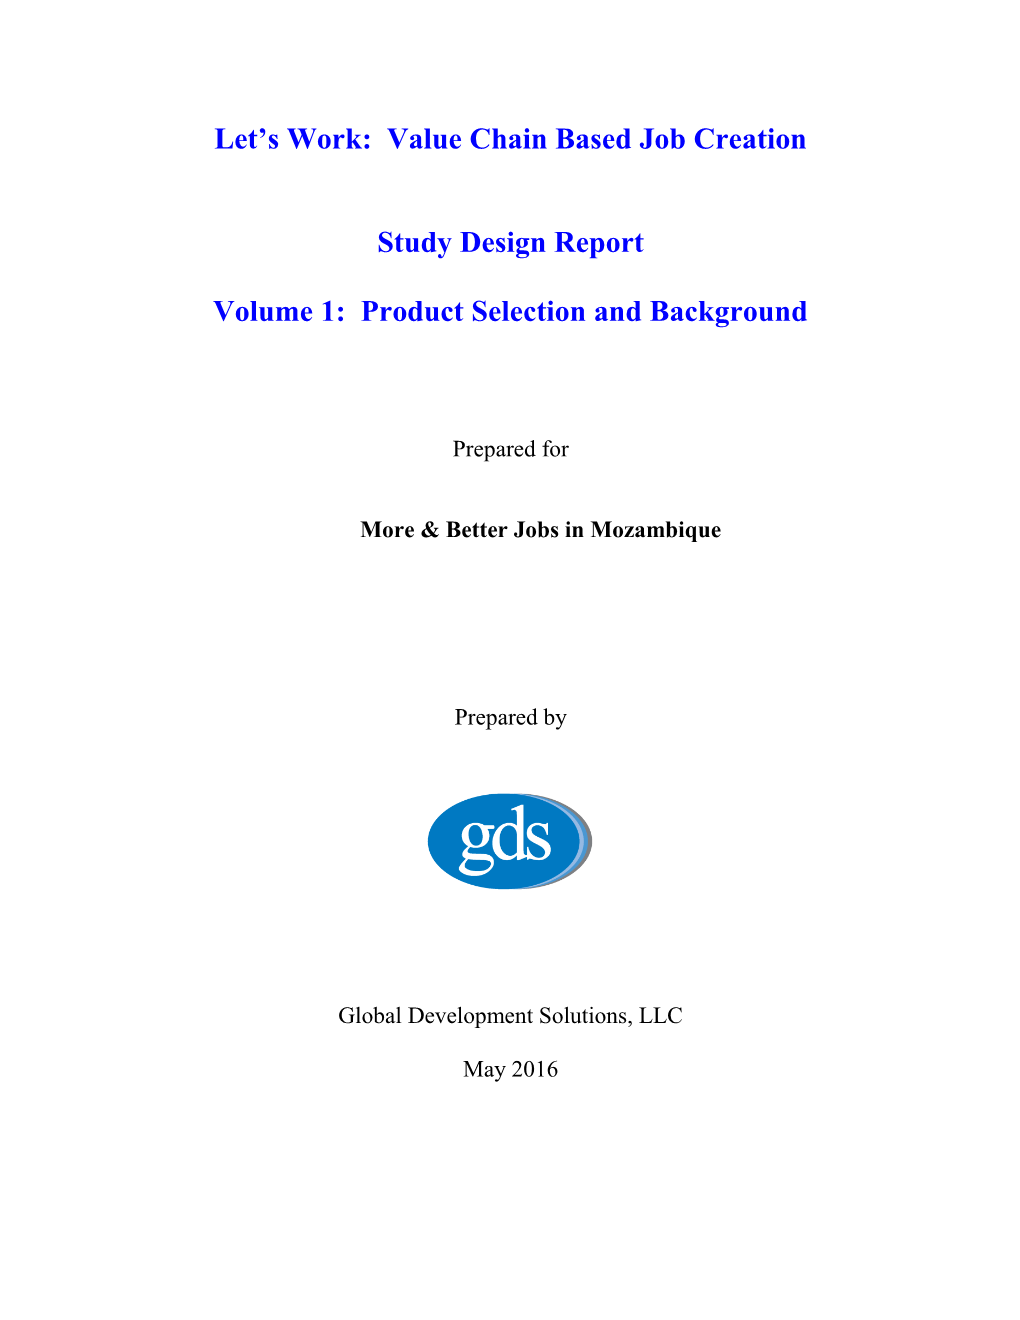 Let's Work: Value Chain Based Job Creation Study Design Report Volume 1: Product Selection and Background